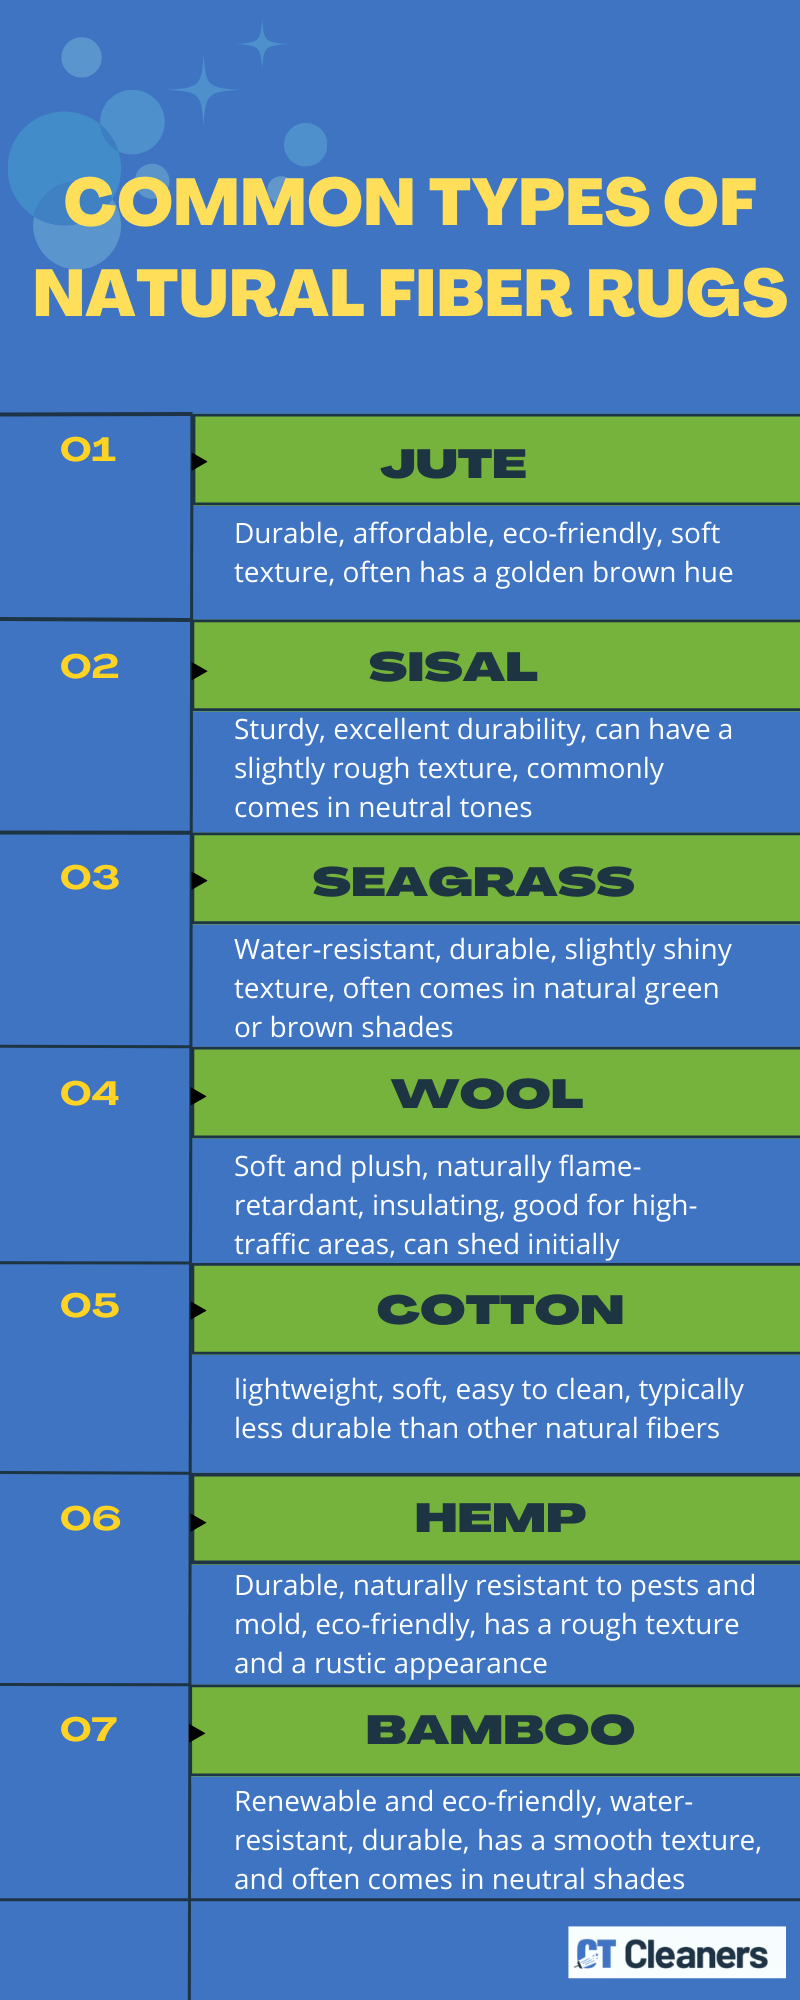 Common Types of Natural Fiber Rugs